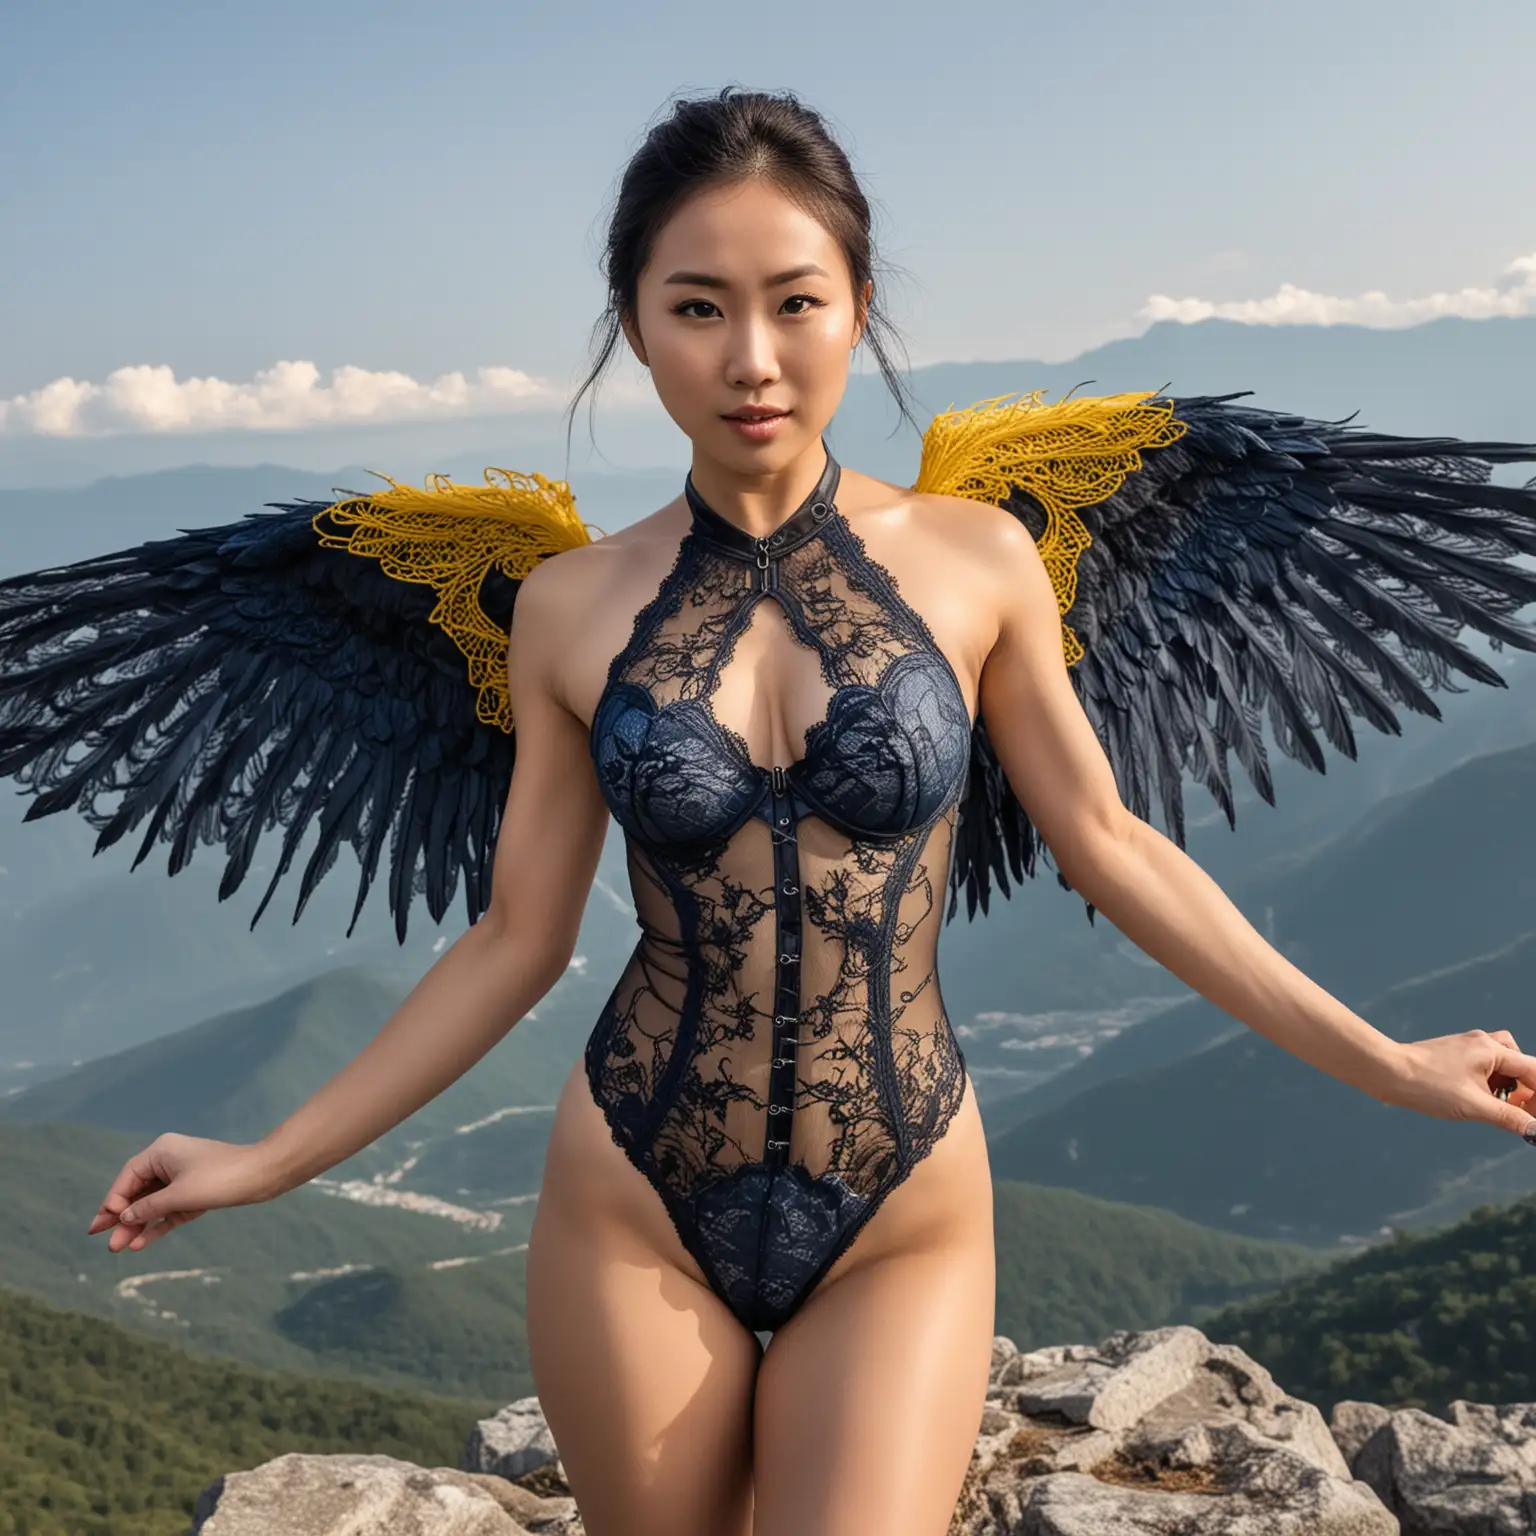 Asian Woman Dominatrix with Wings Flexing Muscles atop Mountain Peak in Blue and Yellow Swimsuit